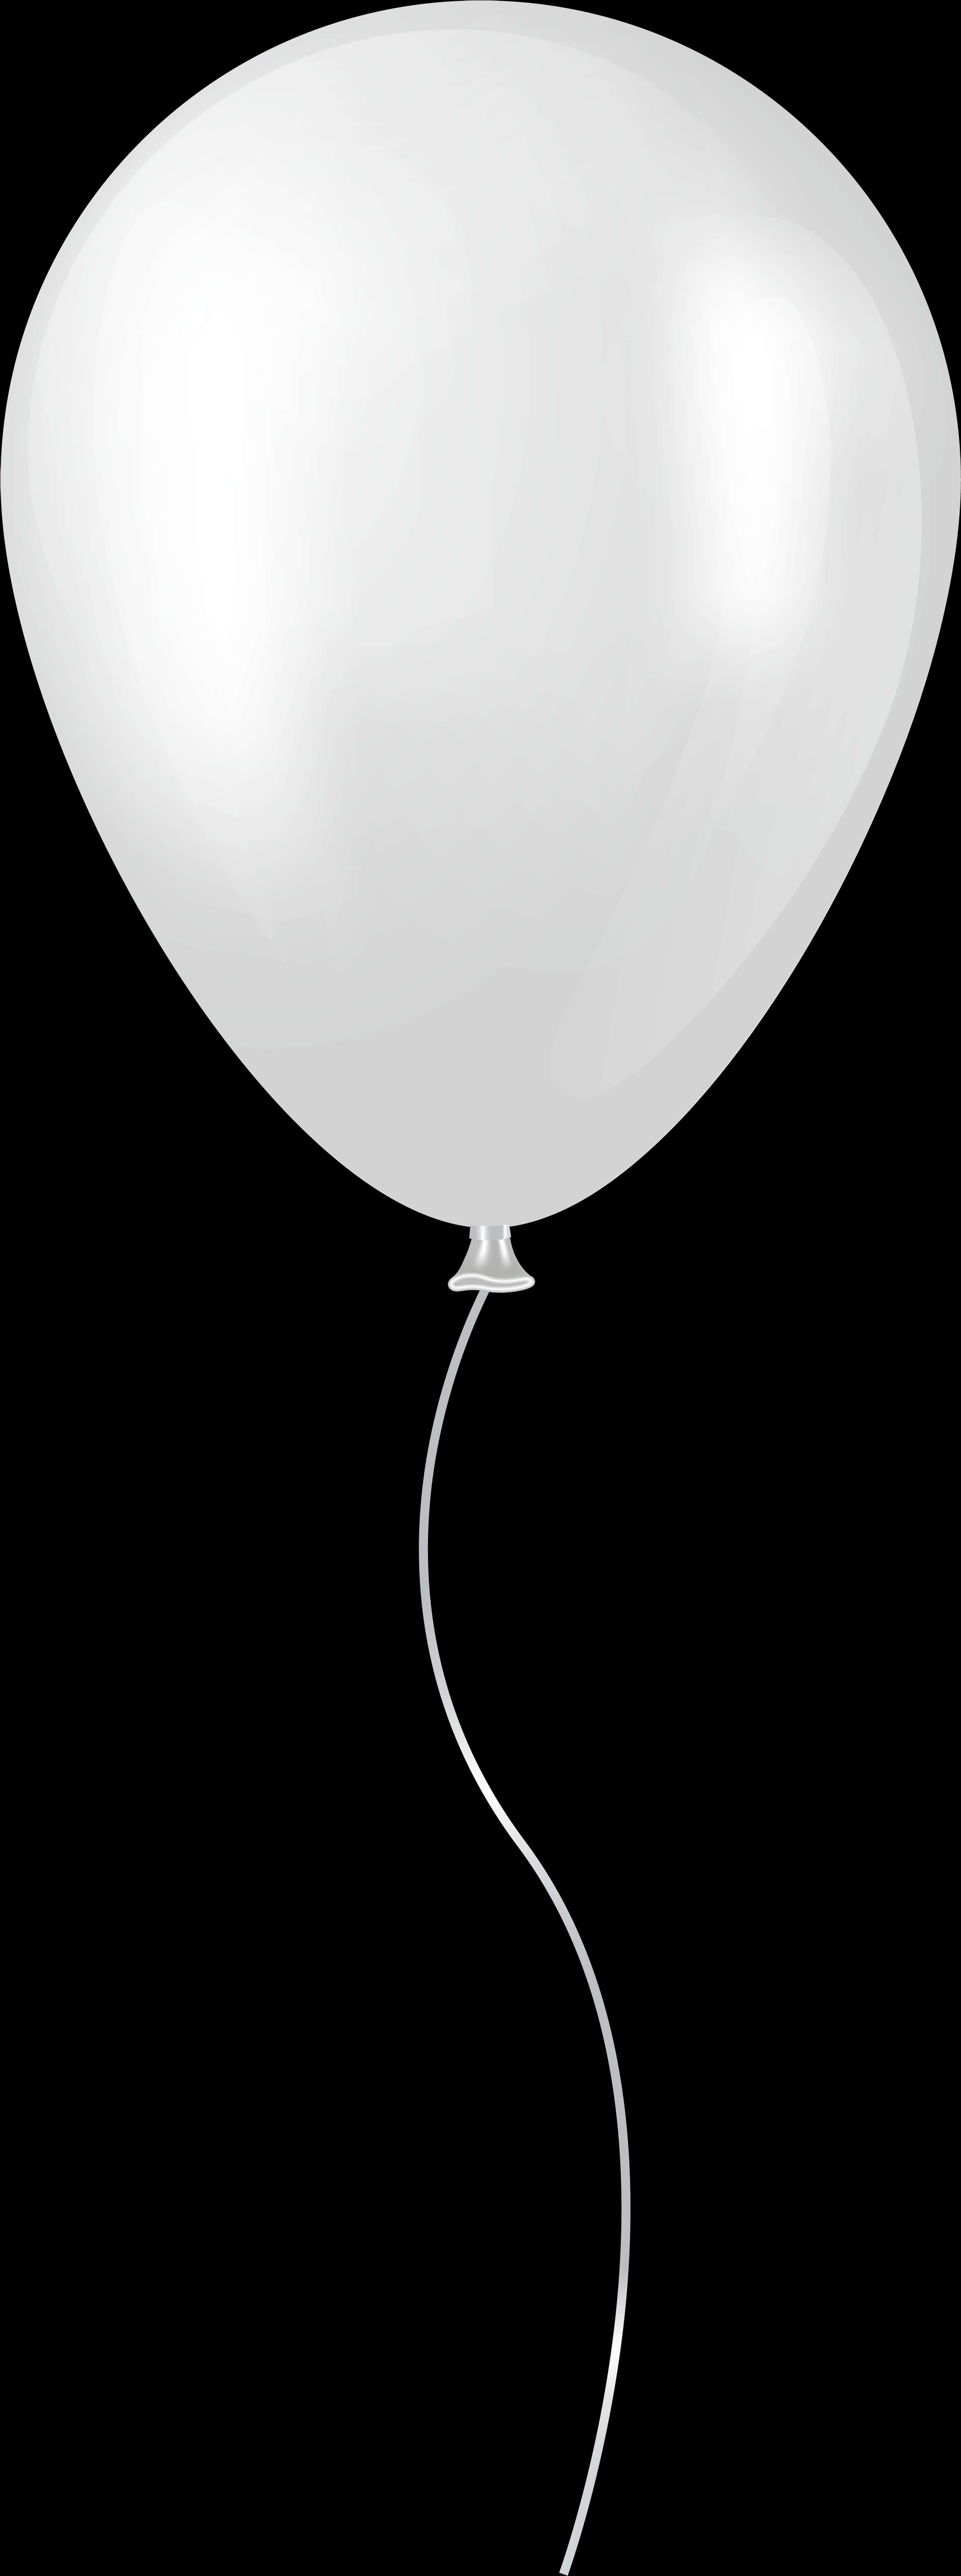 White Balloon Transparent Background.png PNG